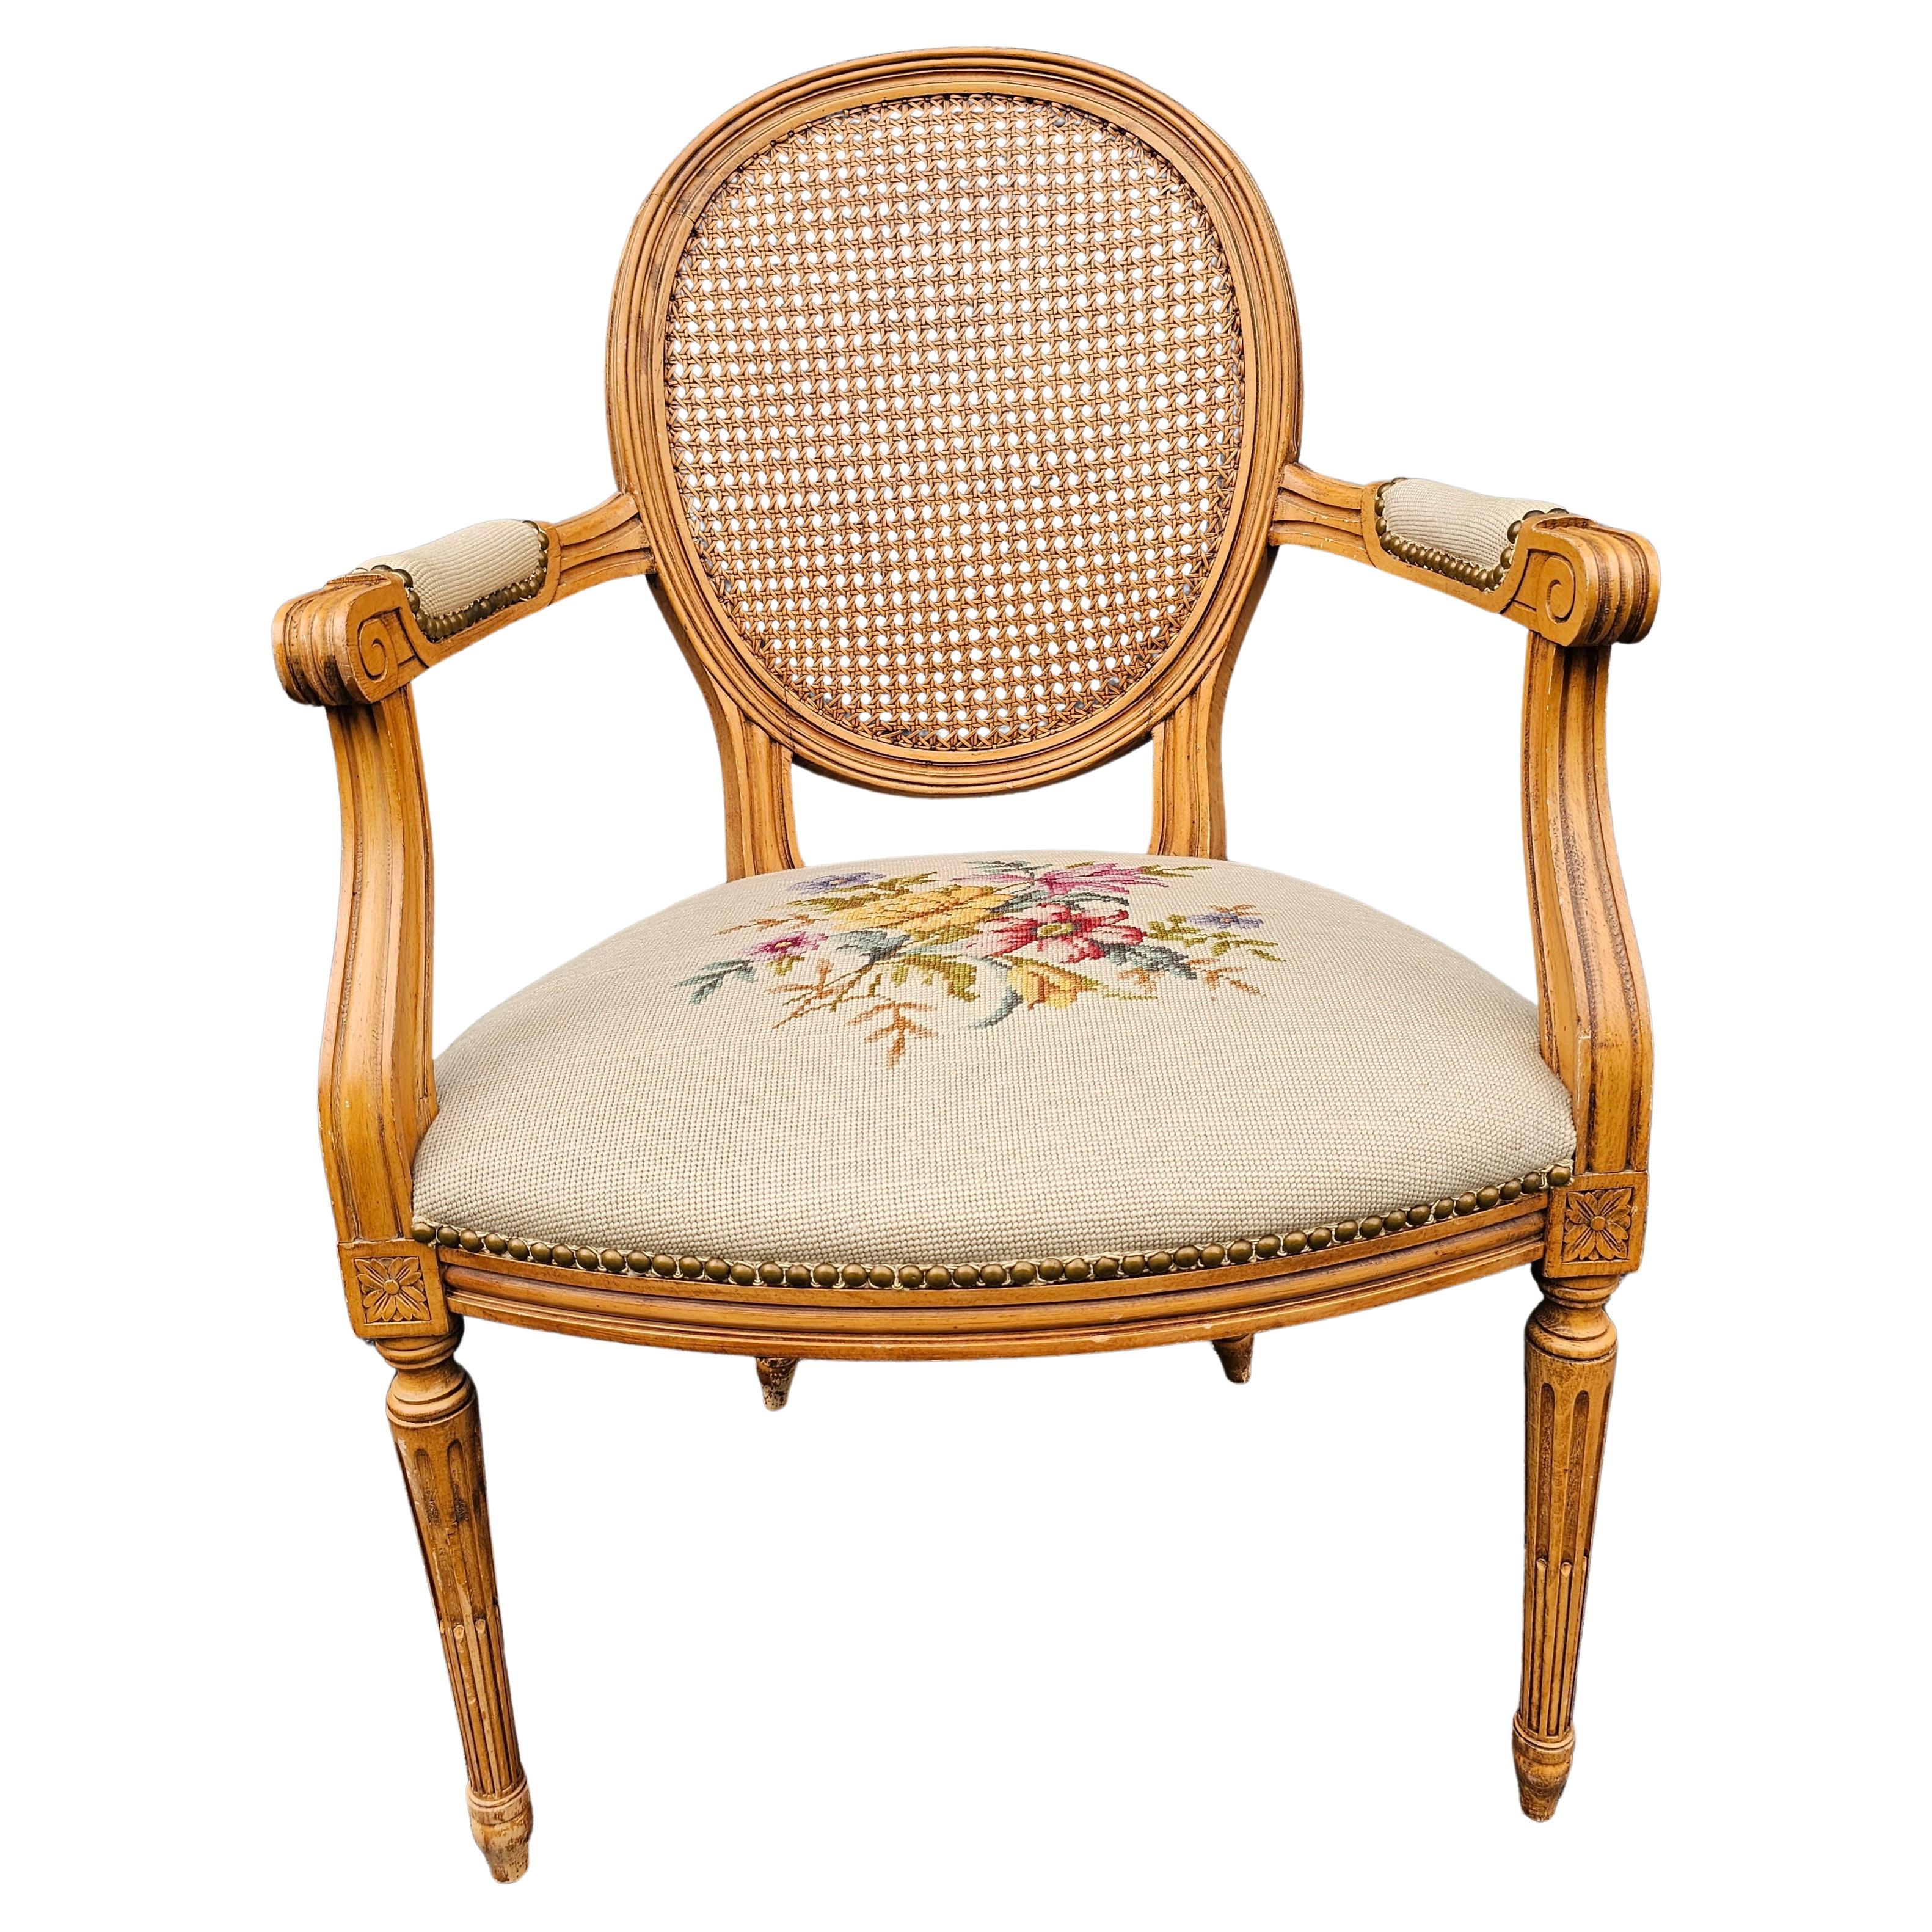 Louis XVI Style Fruitwood, Needlepoint Upholstered Seat And Caned Back Fauteuil For Sale